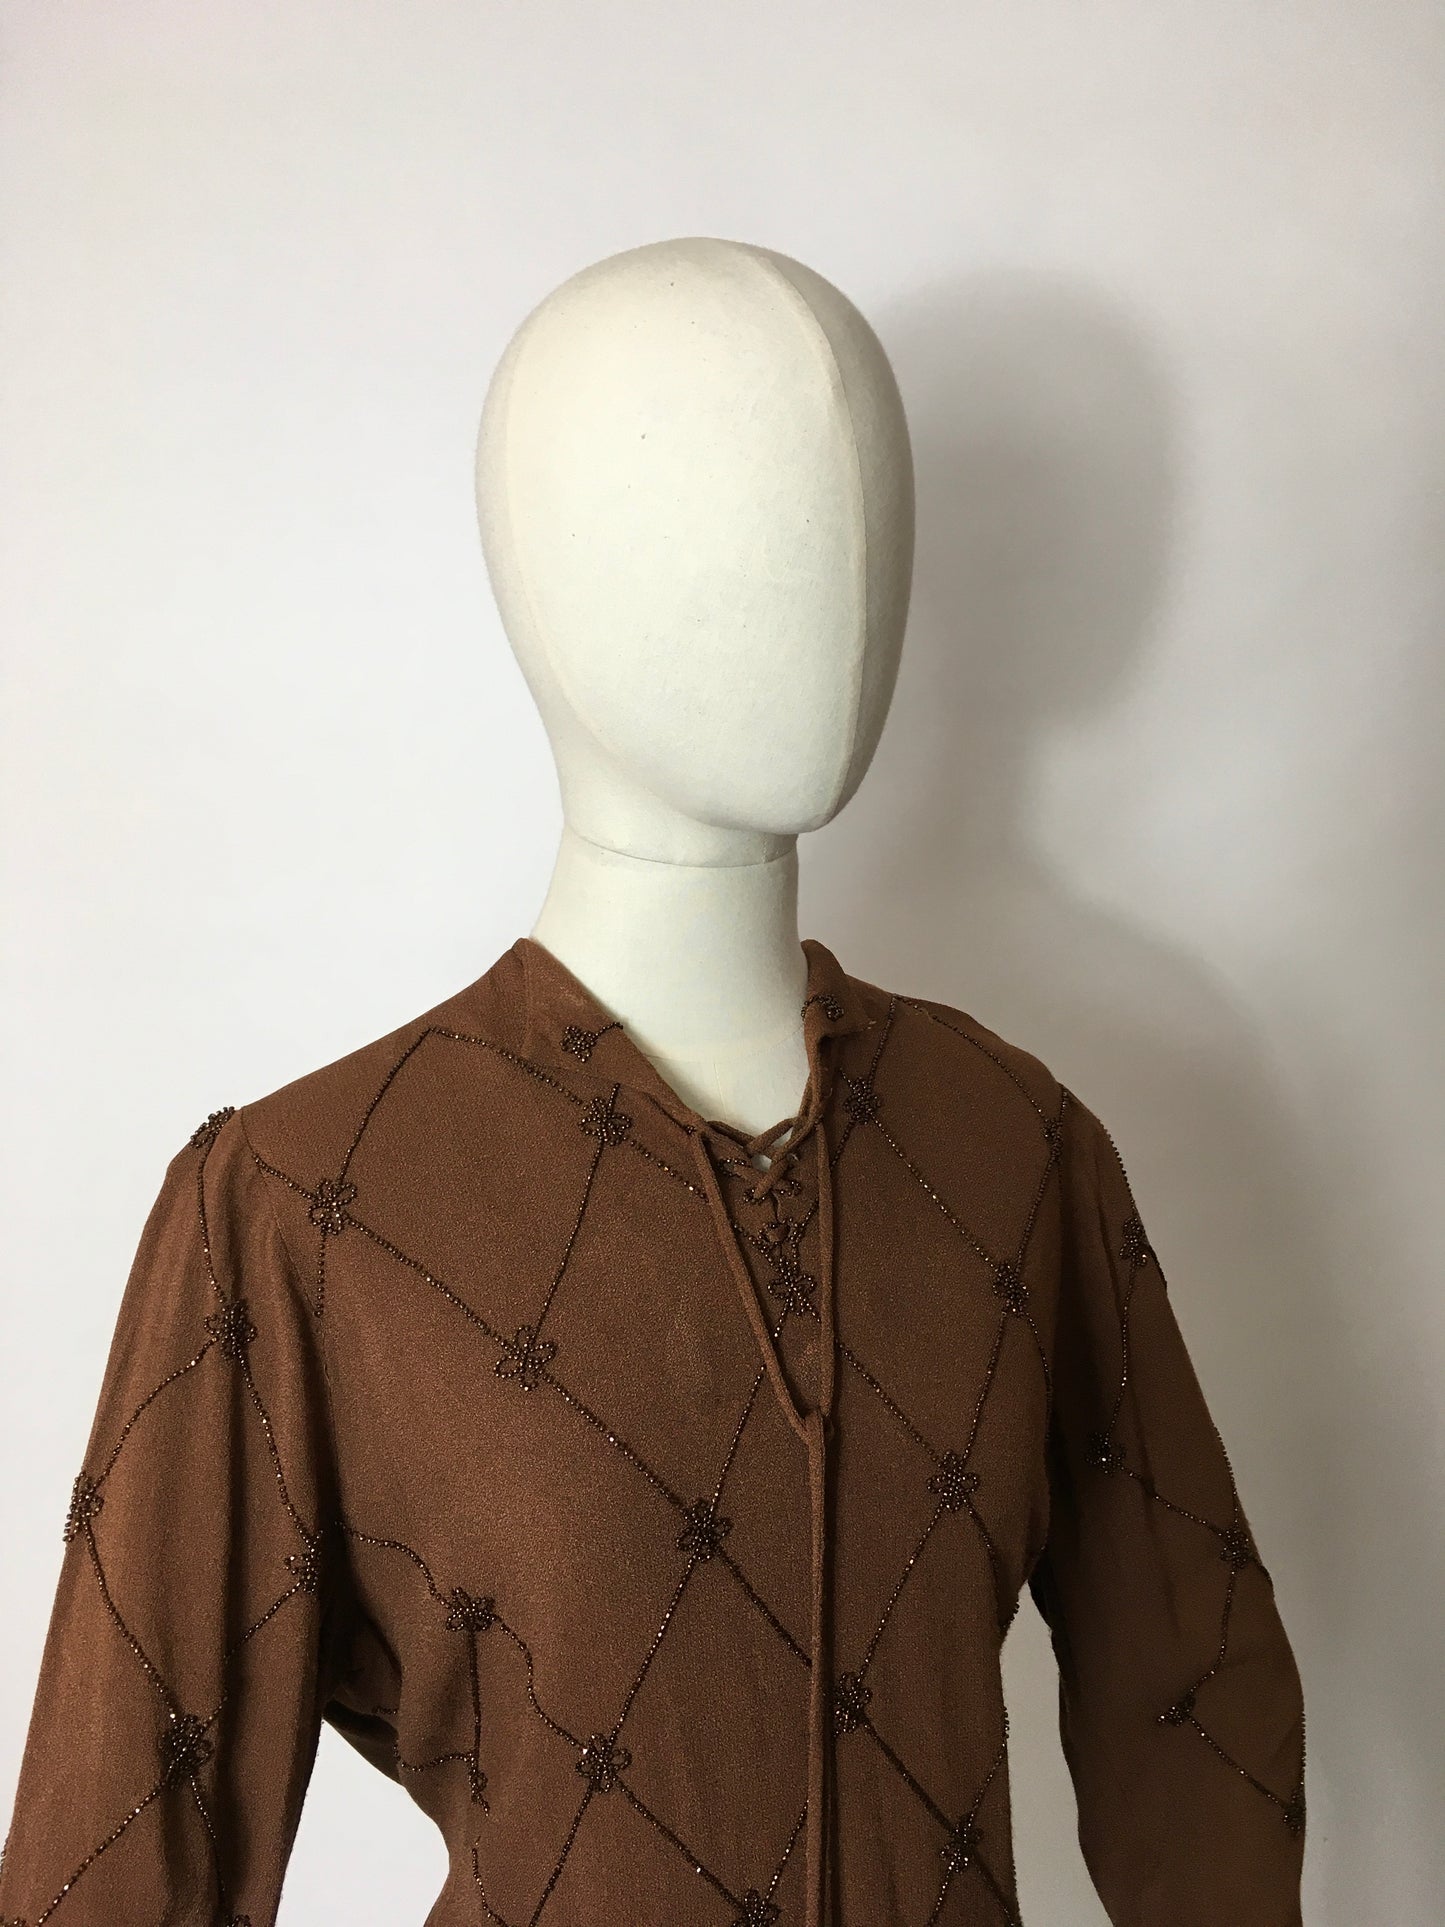 Original 1940’s Double Eleven Plate Label Tunic - Featuring Stunning Bronze Beaded Bodice Detailing on an Autumnal Brown Crepe